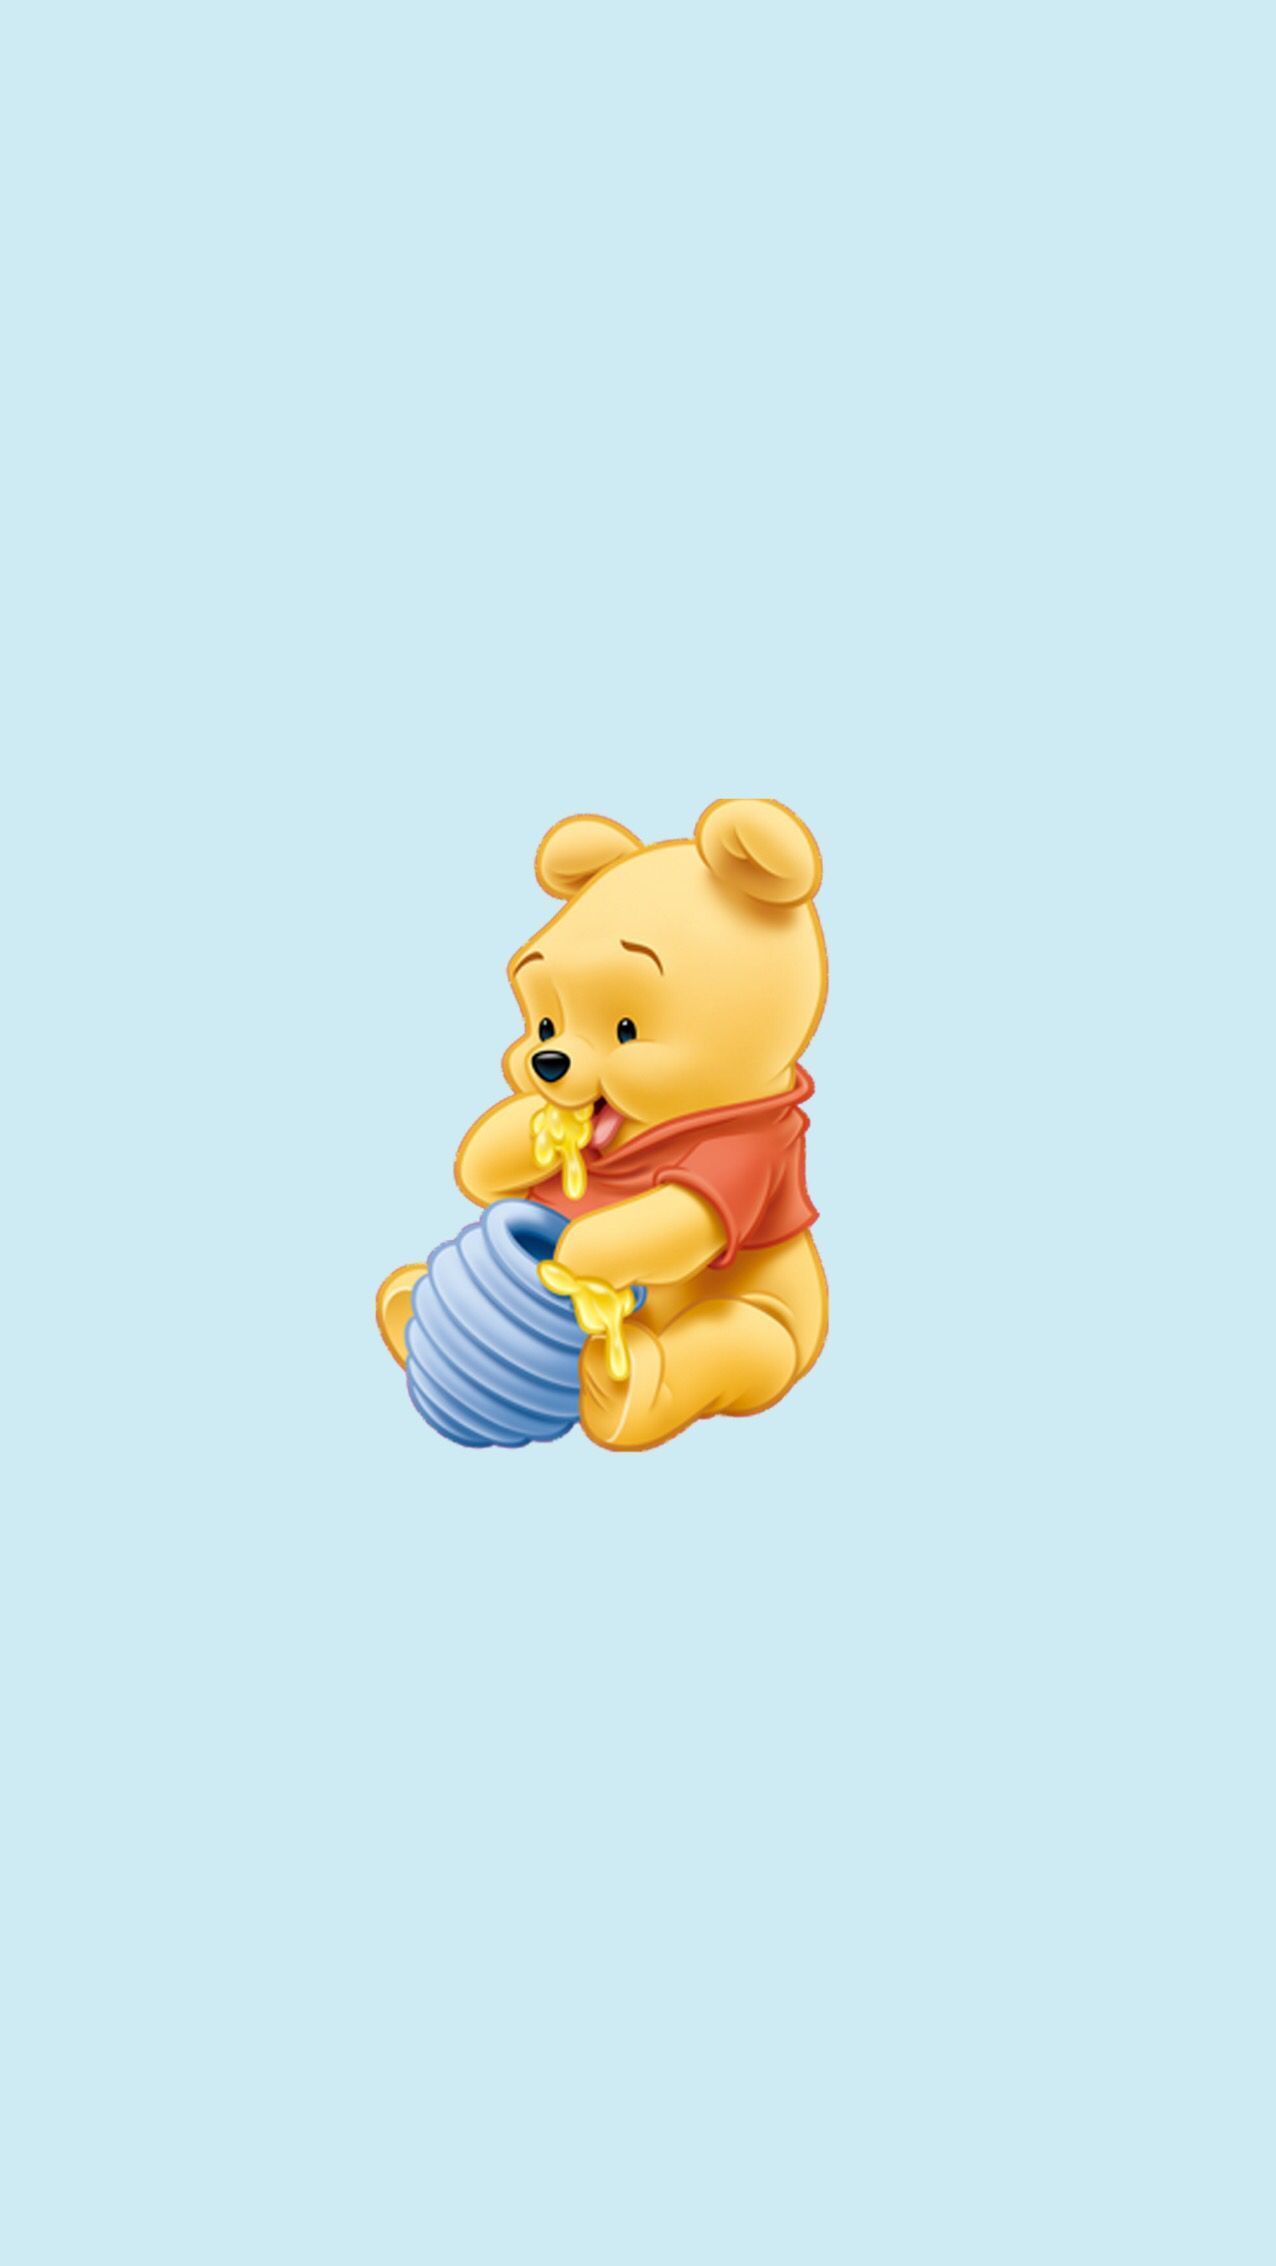 Aesthetic Winnie The Pooh Wallpapers - Wallpaper Cave